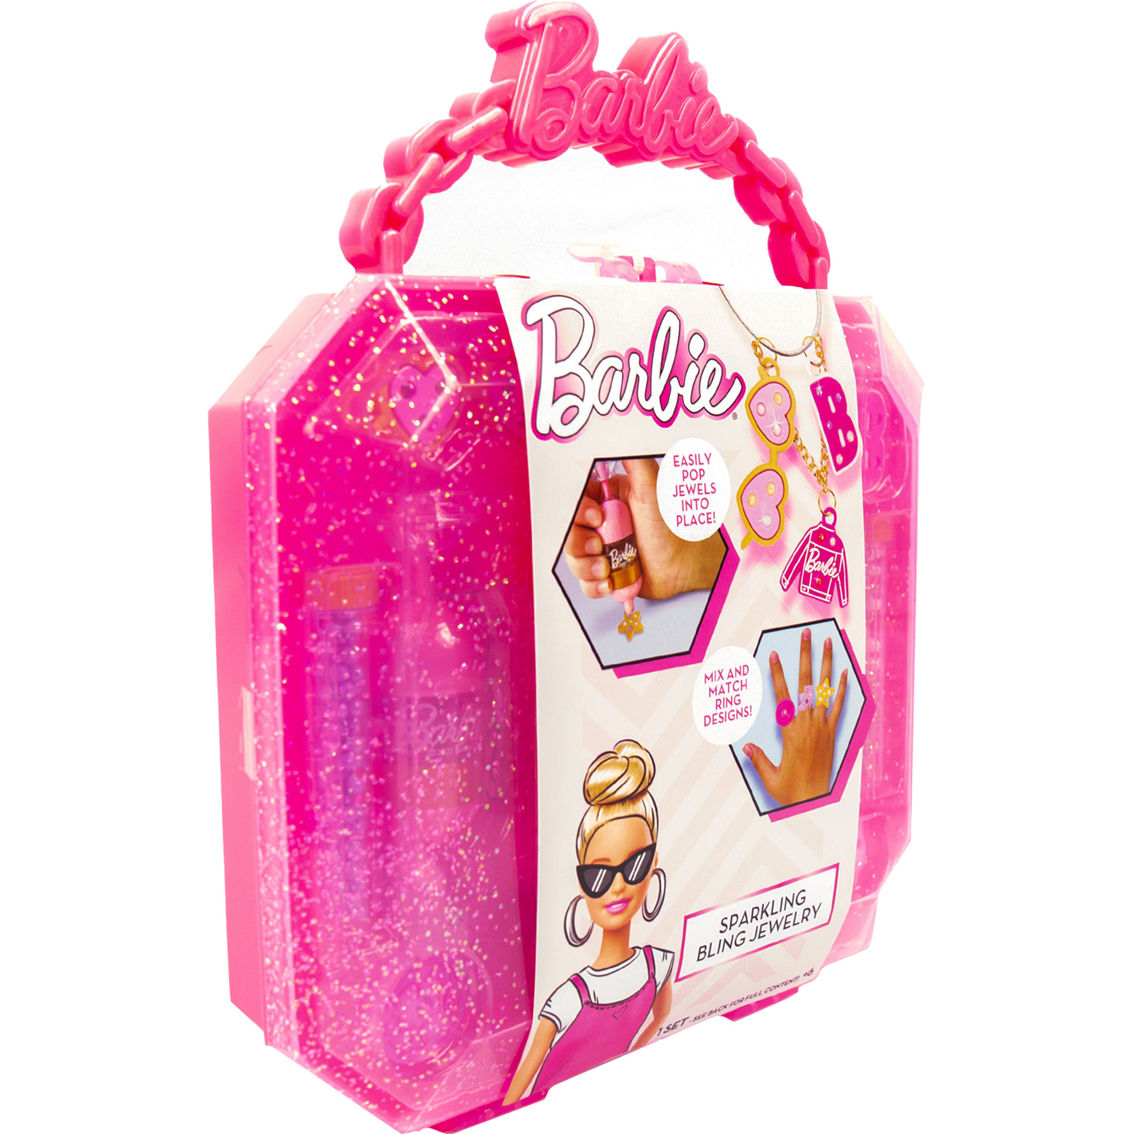 Barbie Sparkling Bling Jewelry - Image 2 of 4